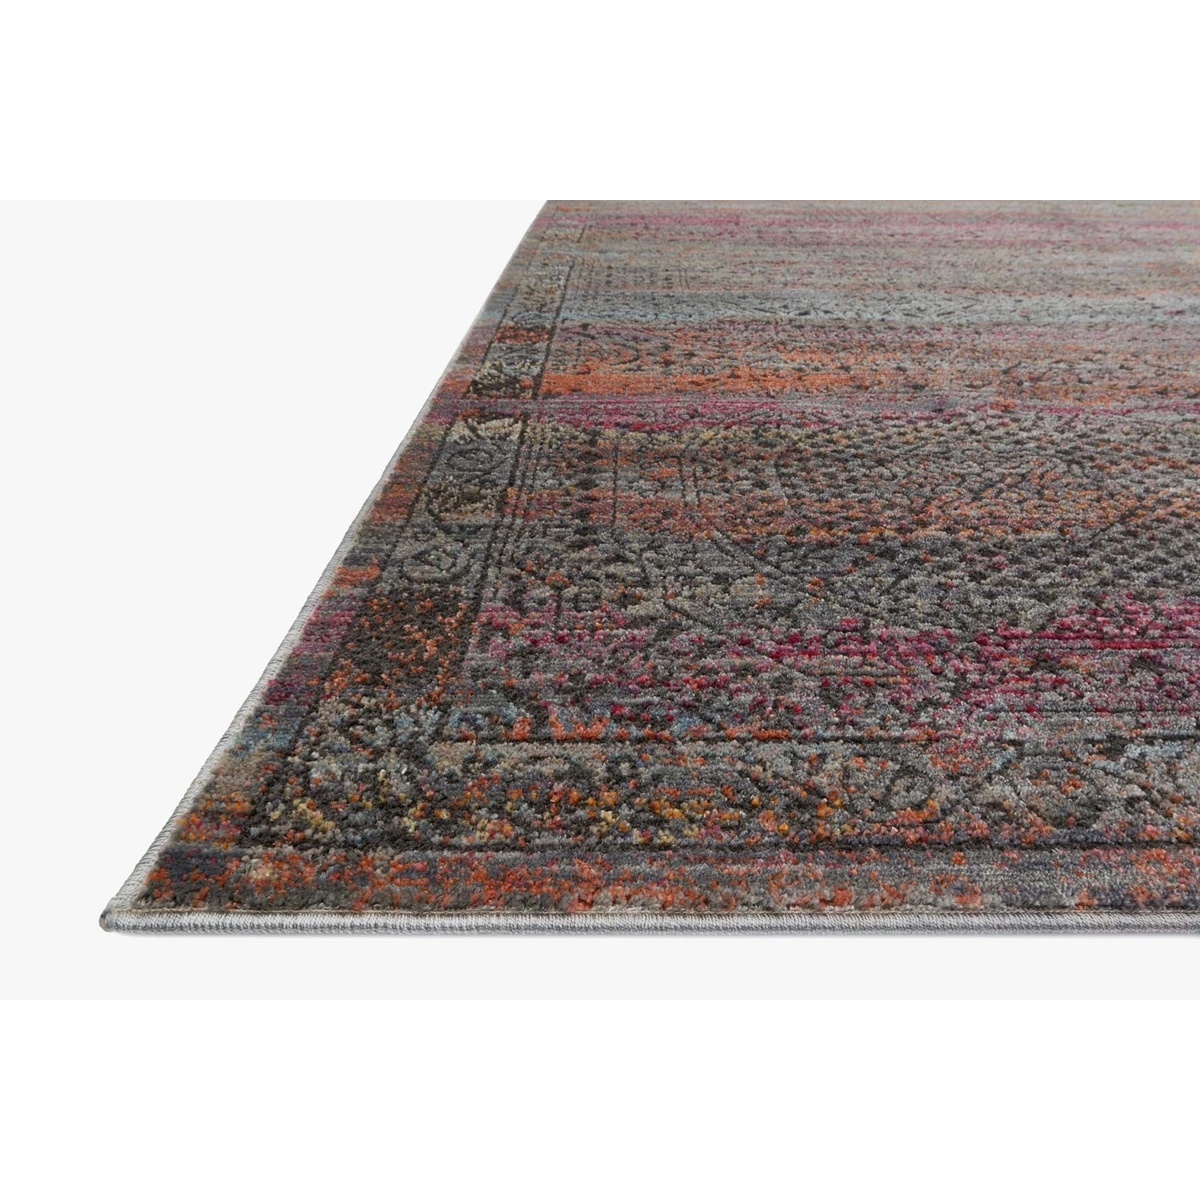 Javari Rugs by Loloi - JV-02 Charcoal/Sunset-Loloi Rugs-Blue Hand Home